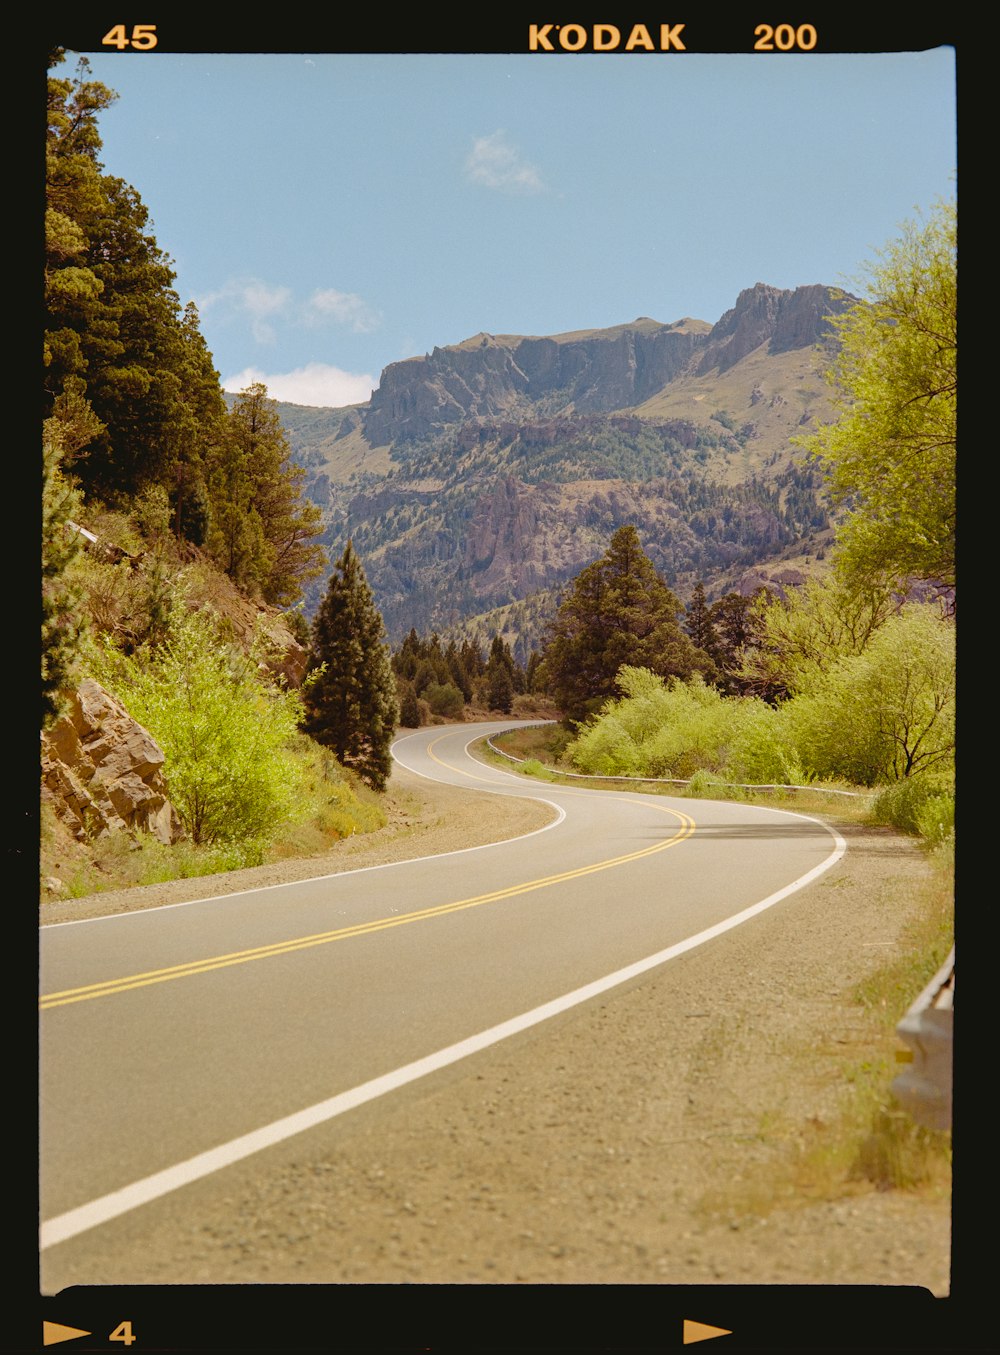 a picture of a road with mountains in the background